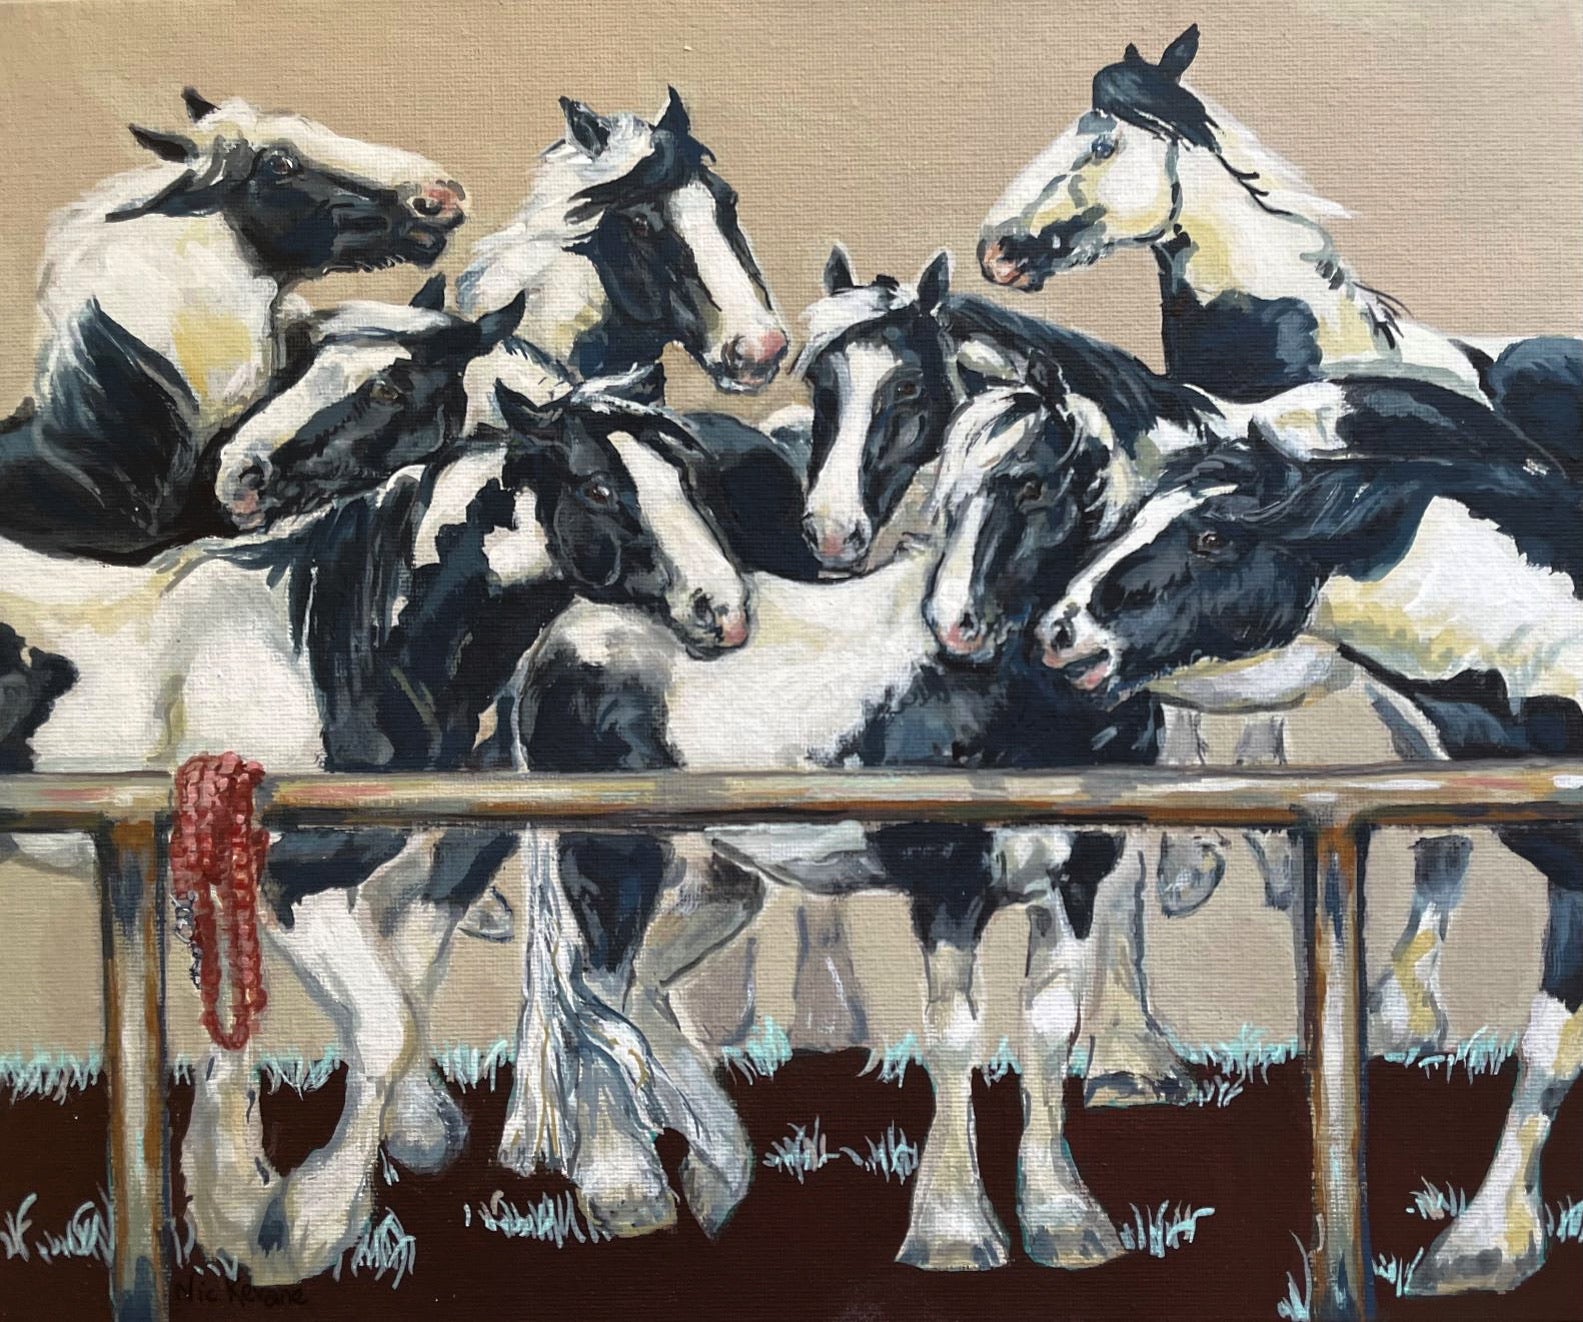 Piebald Ponies - A framed painting of black and white horses